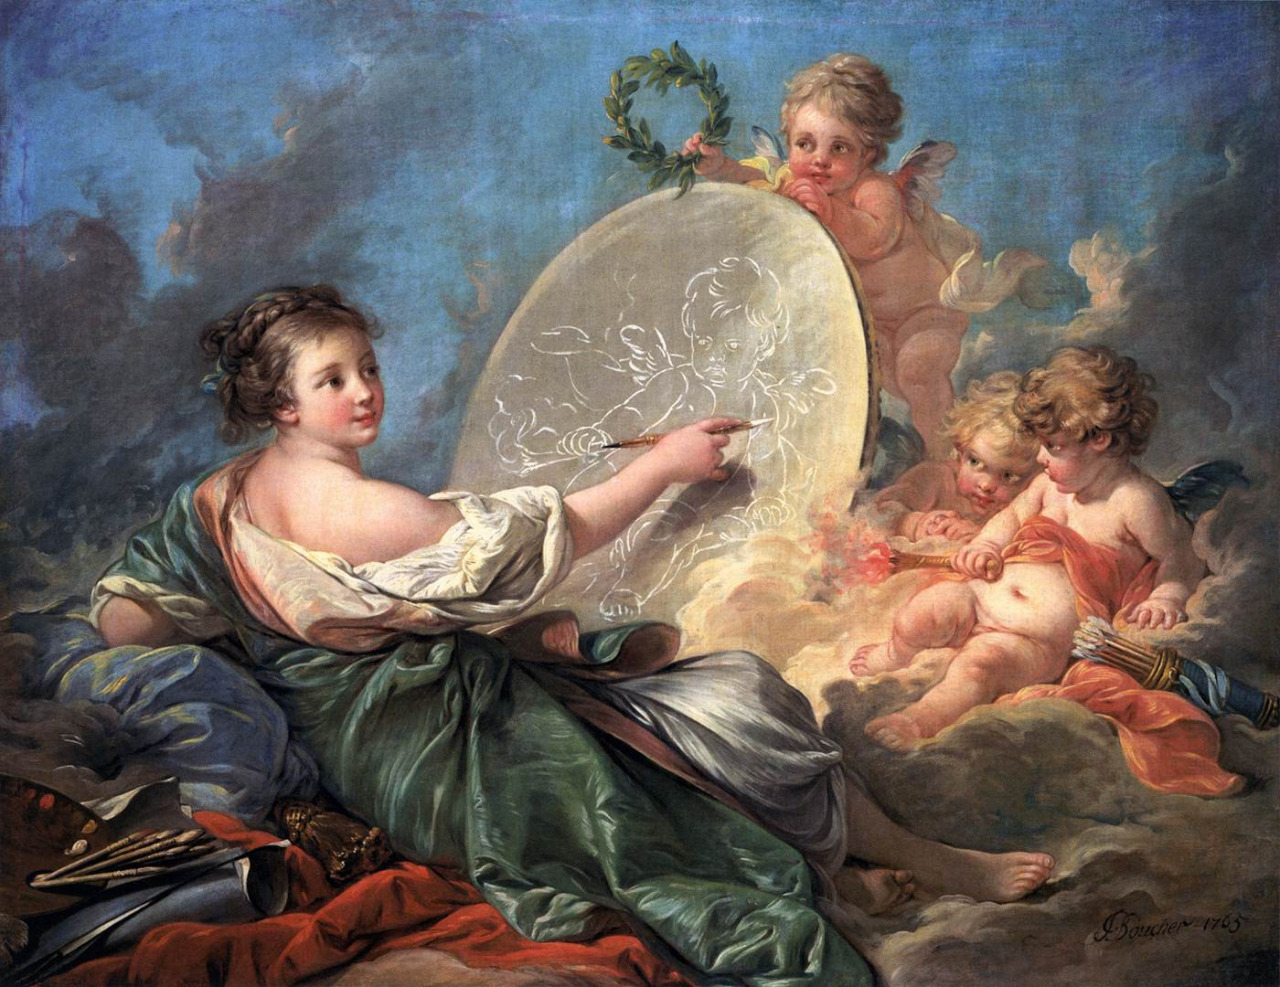 Allegory of Painting by Francois Boucher - 1765 - 101.5 x 130 cm  National Gallery of Art